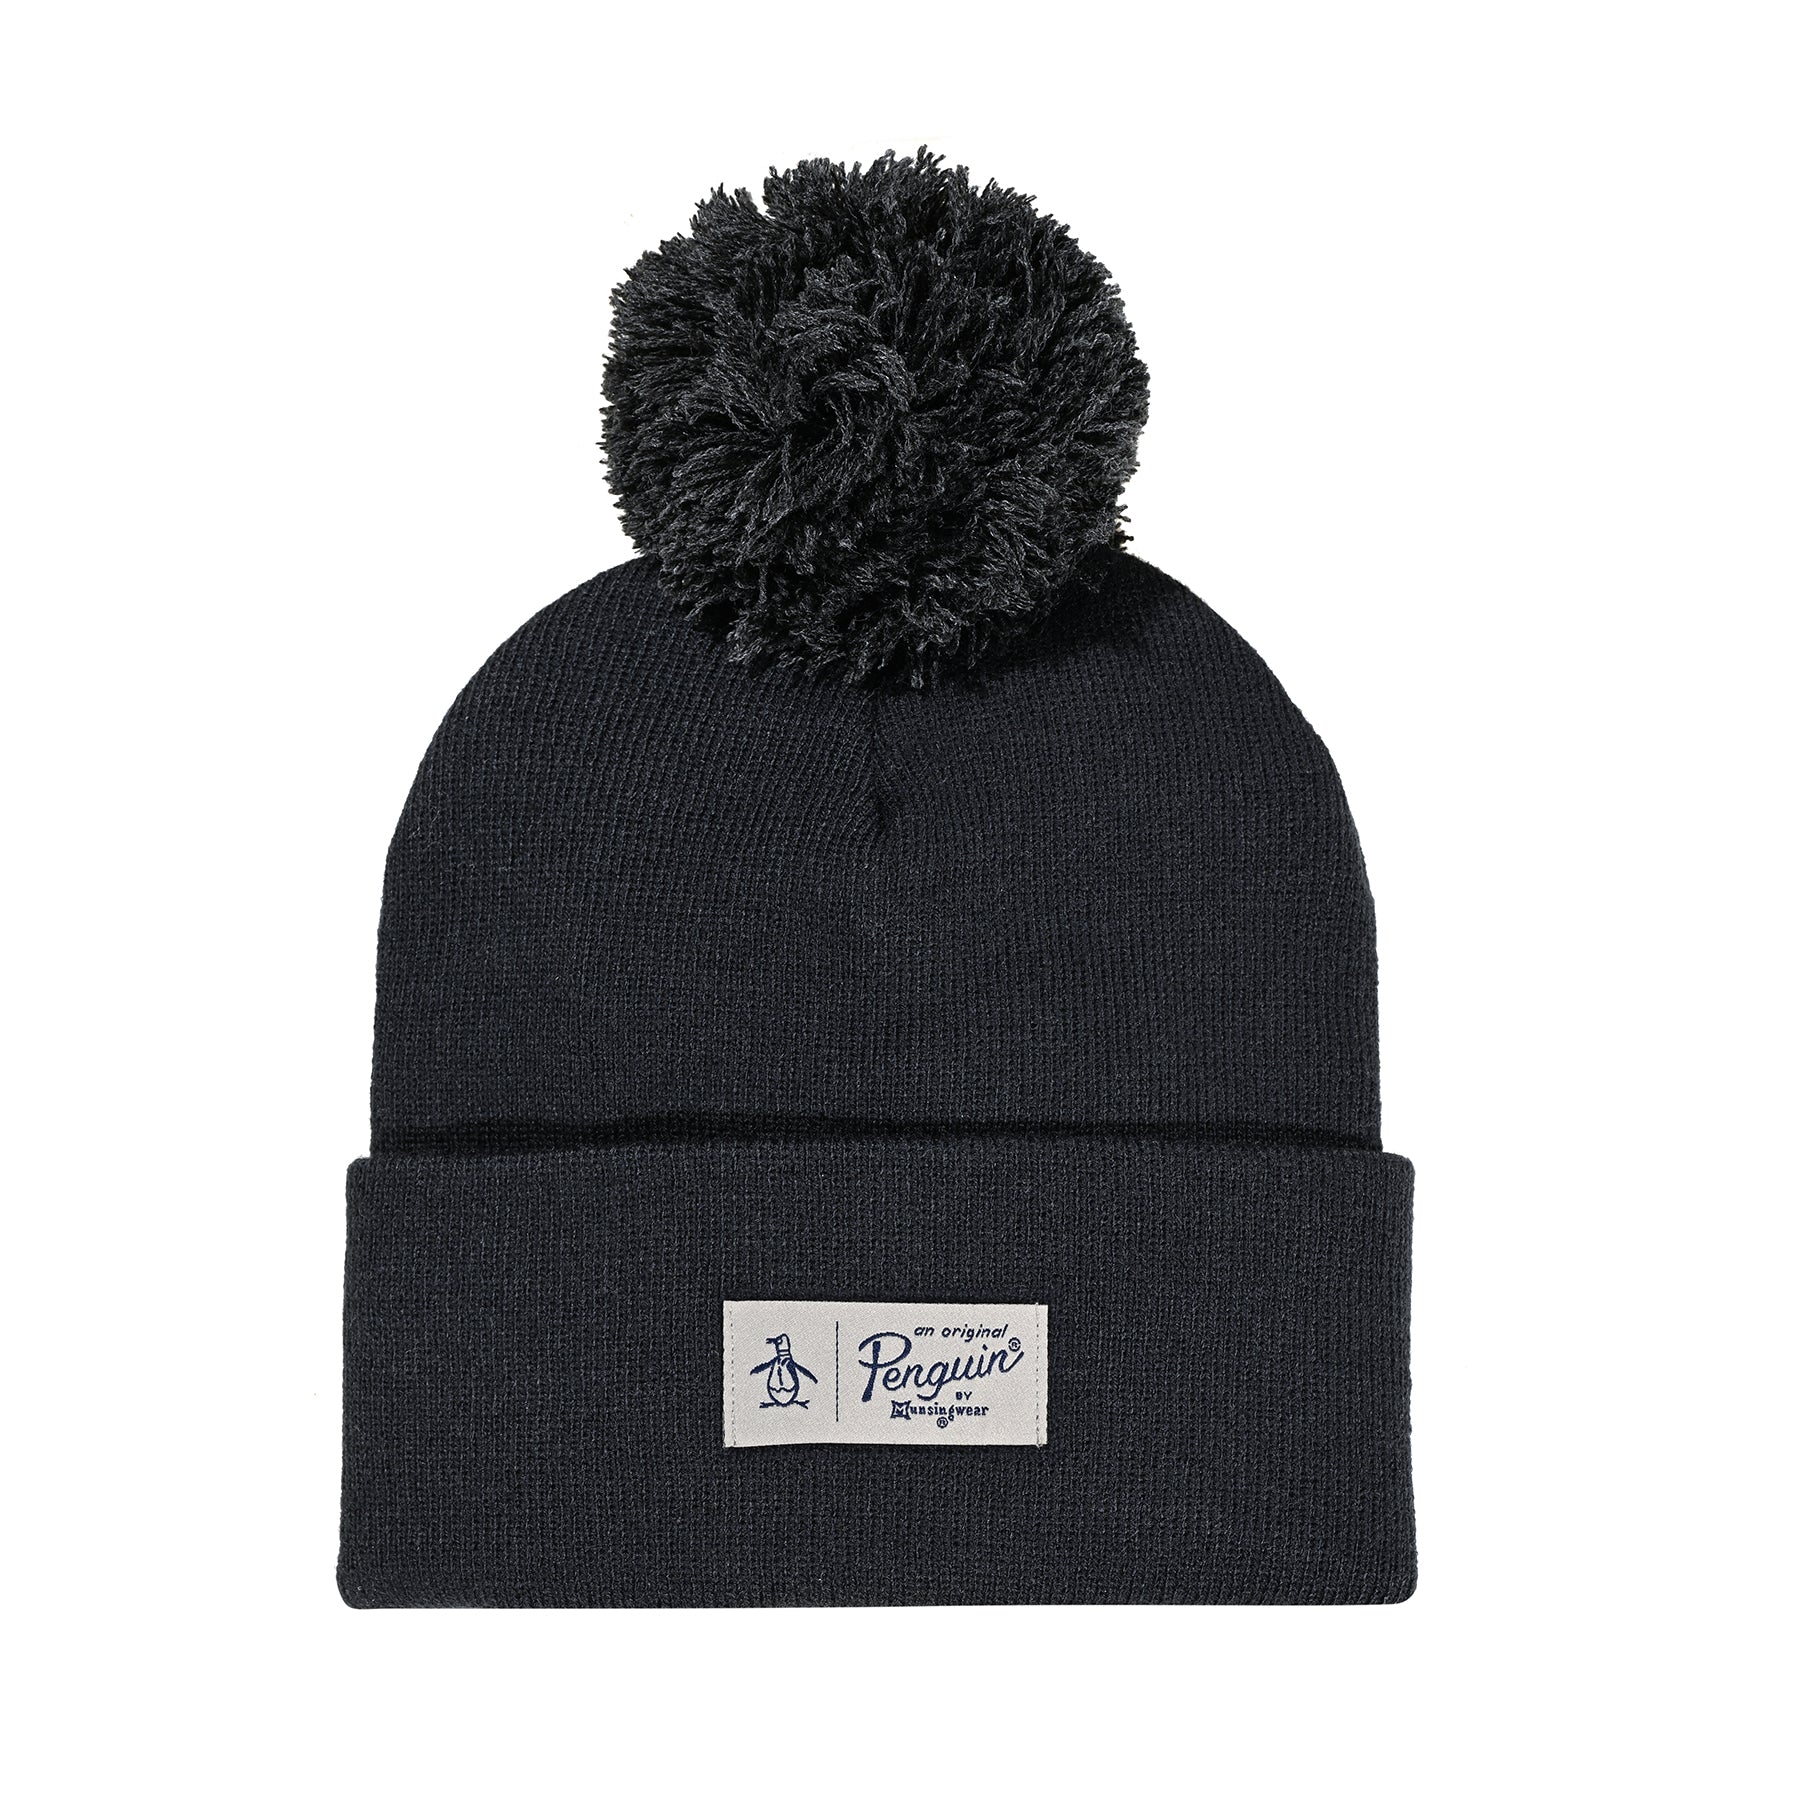 View Mathew Classic Bobble Hat In Black information